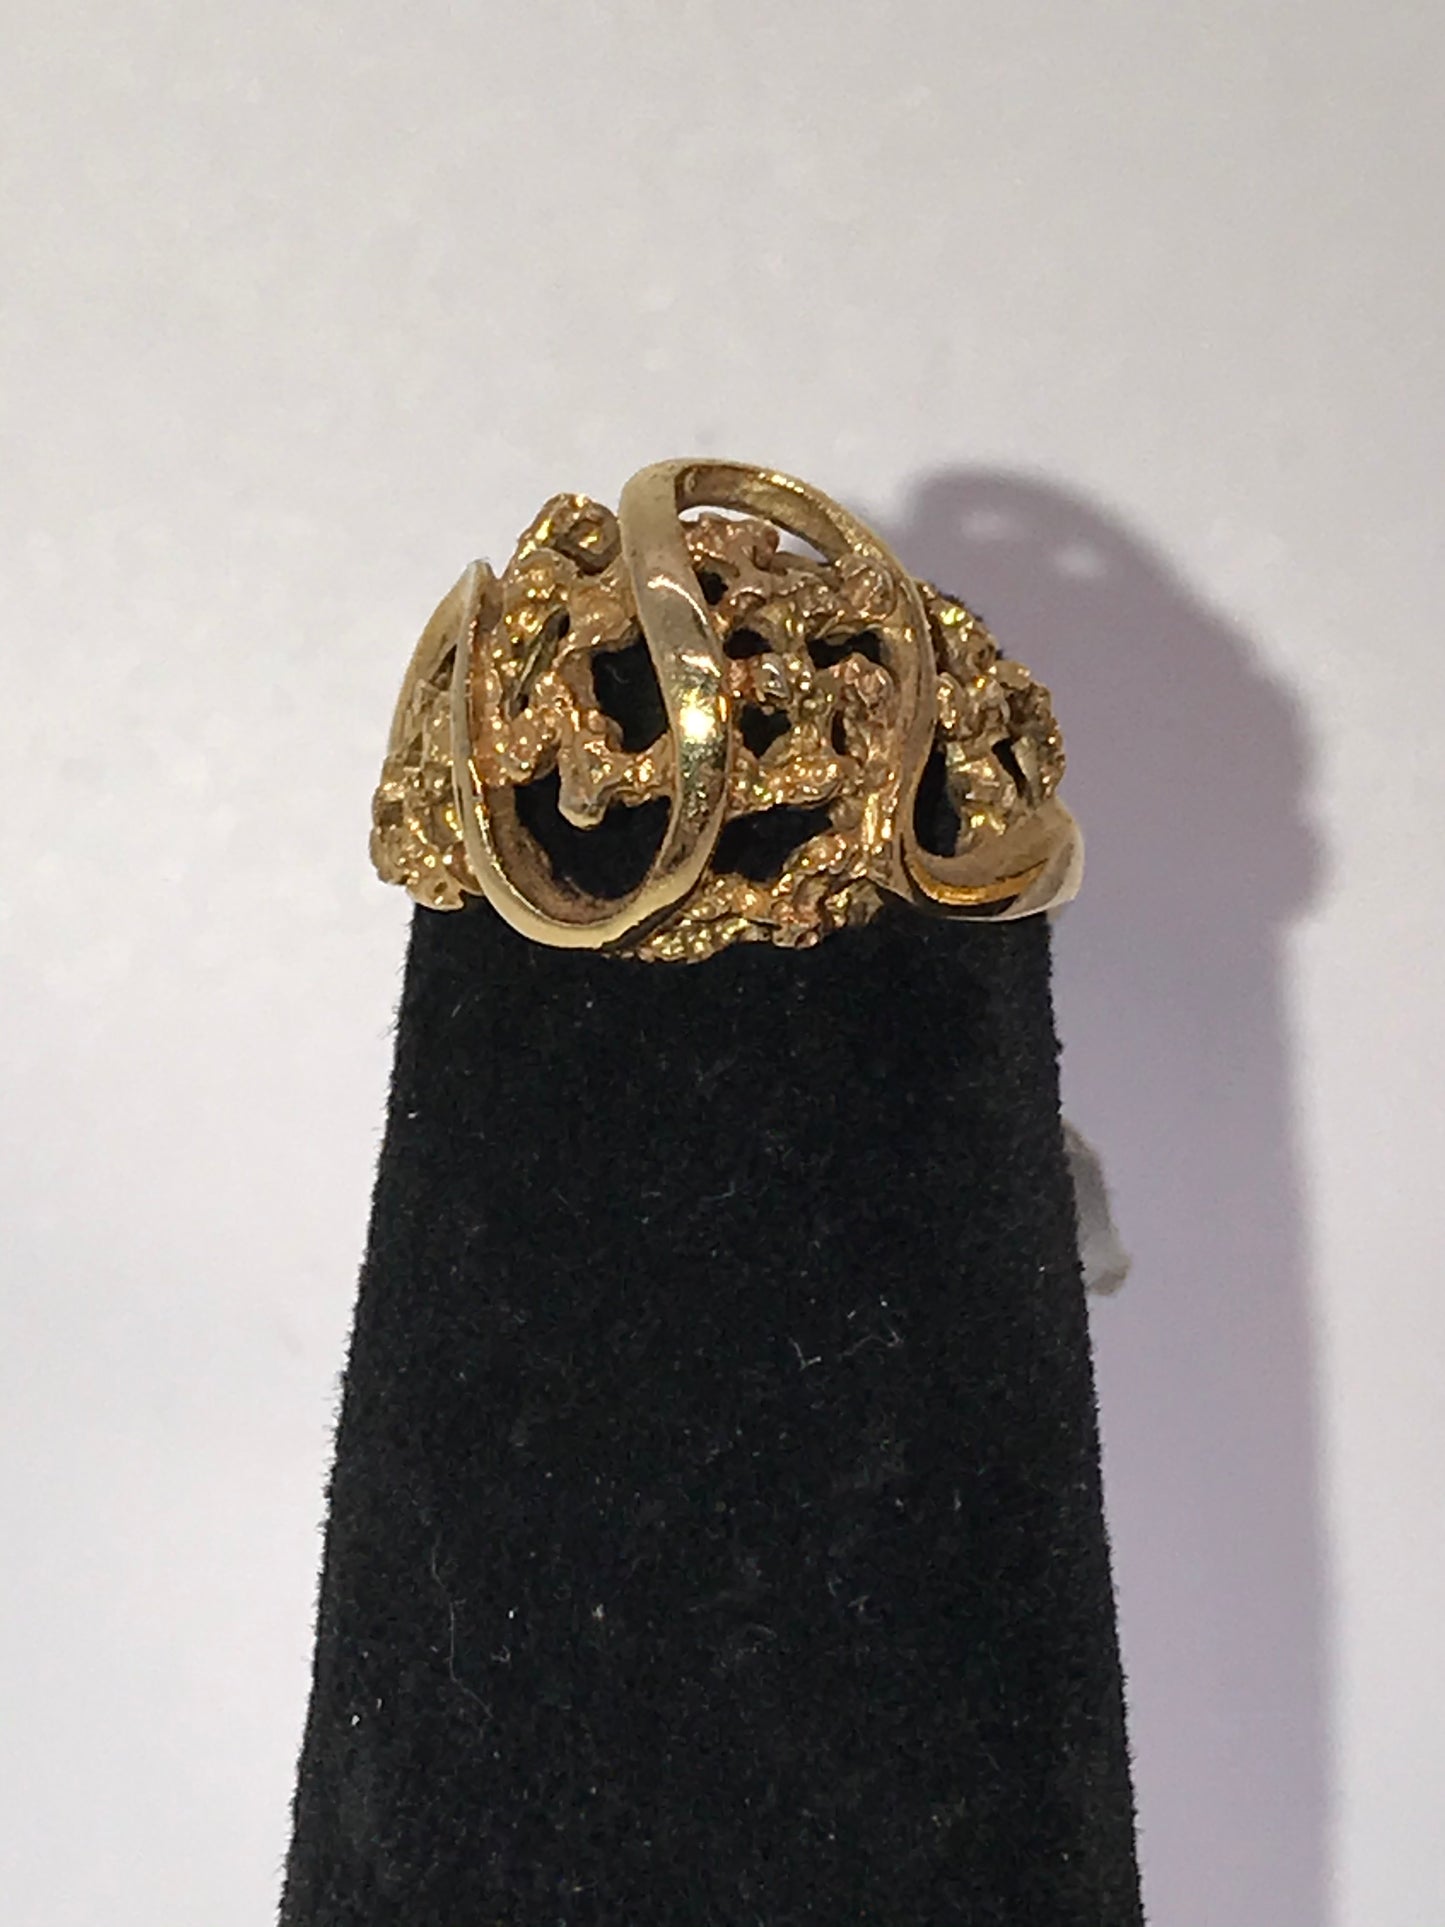 14 Kt Gp Ring, Pretty And Simple Design, Size 5